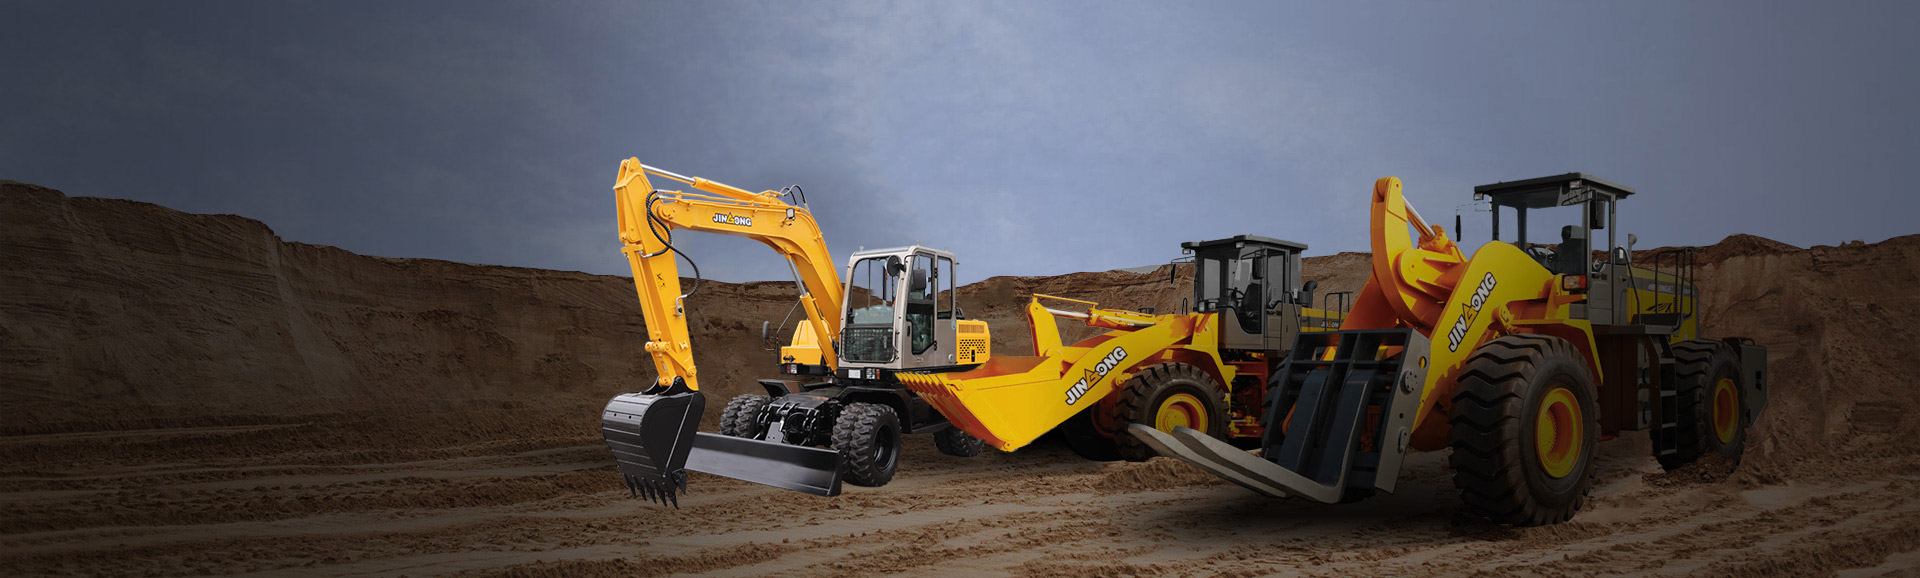 LEADING BRAND IN CHINA CONSTRUCTION MACHINERY INDUSTRY